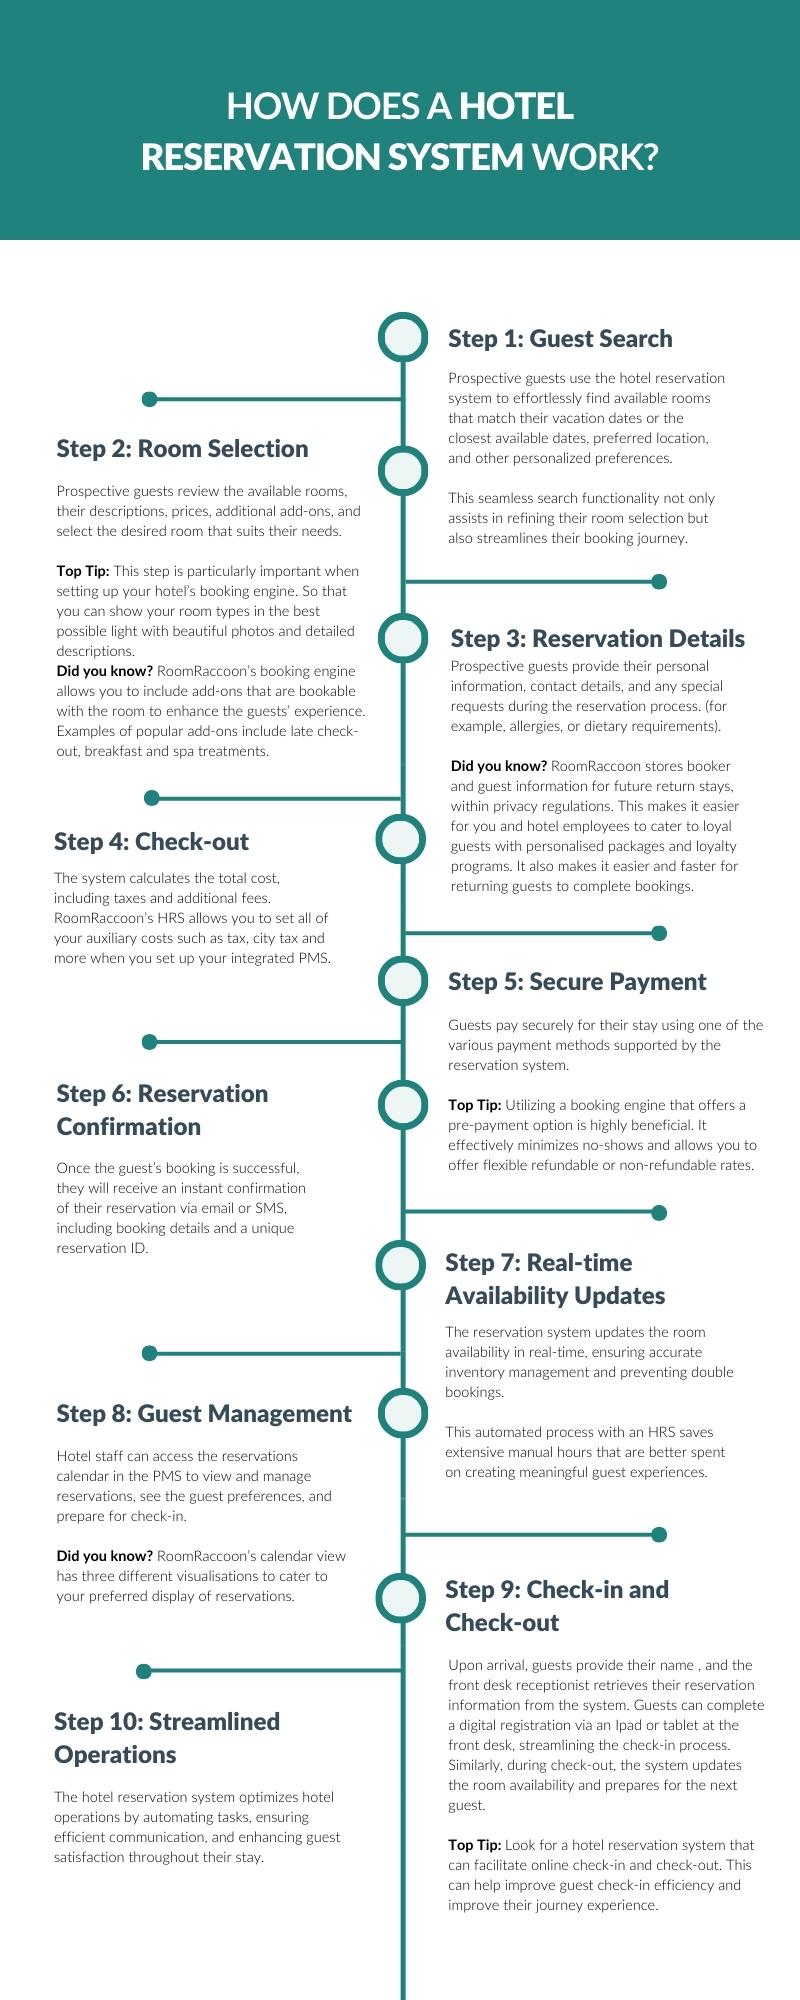 How a hotel reservation system works: step by step process